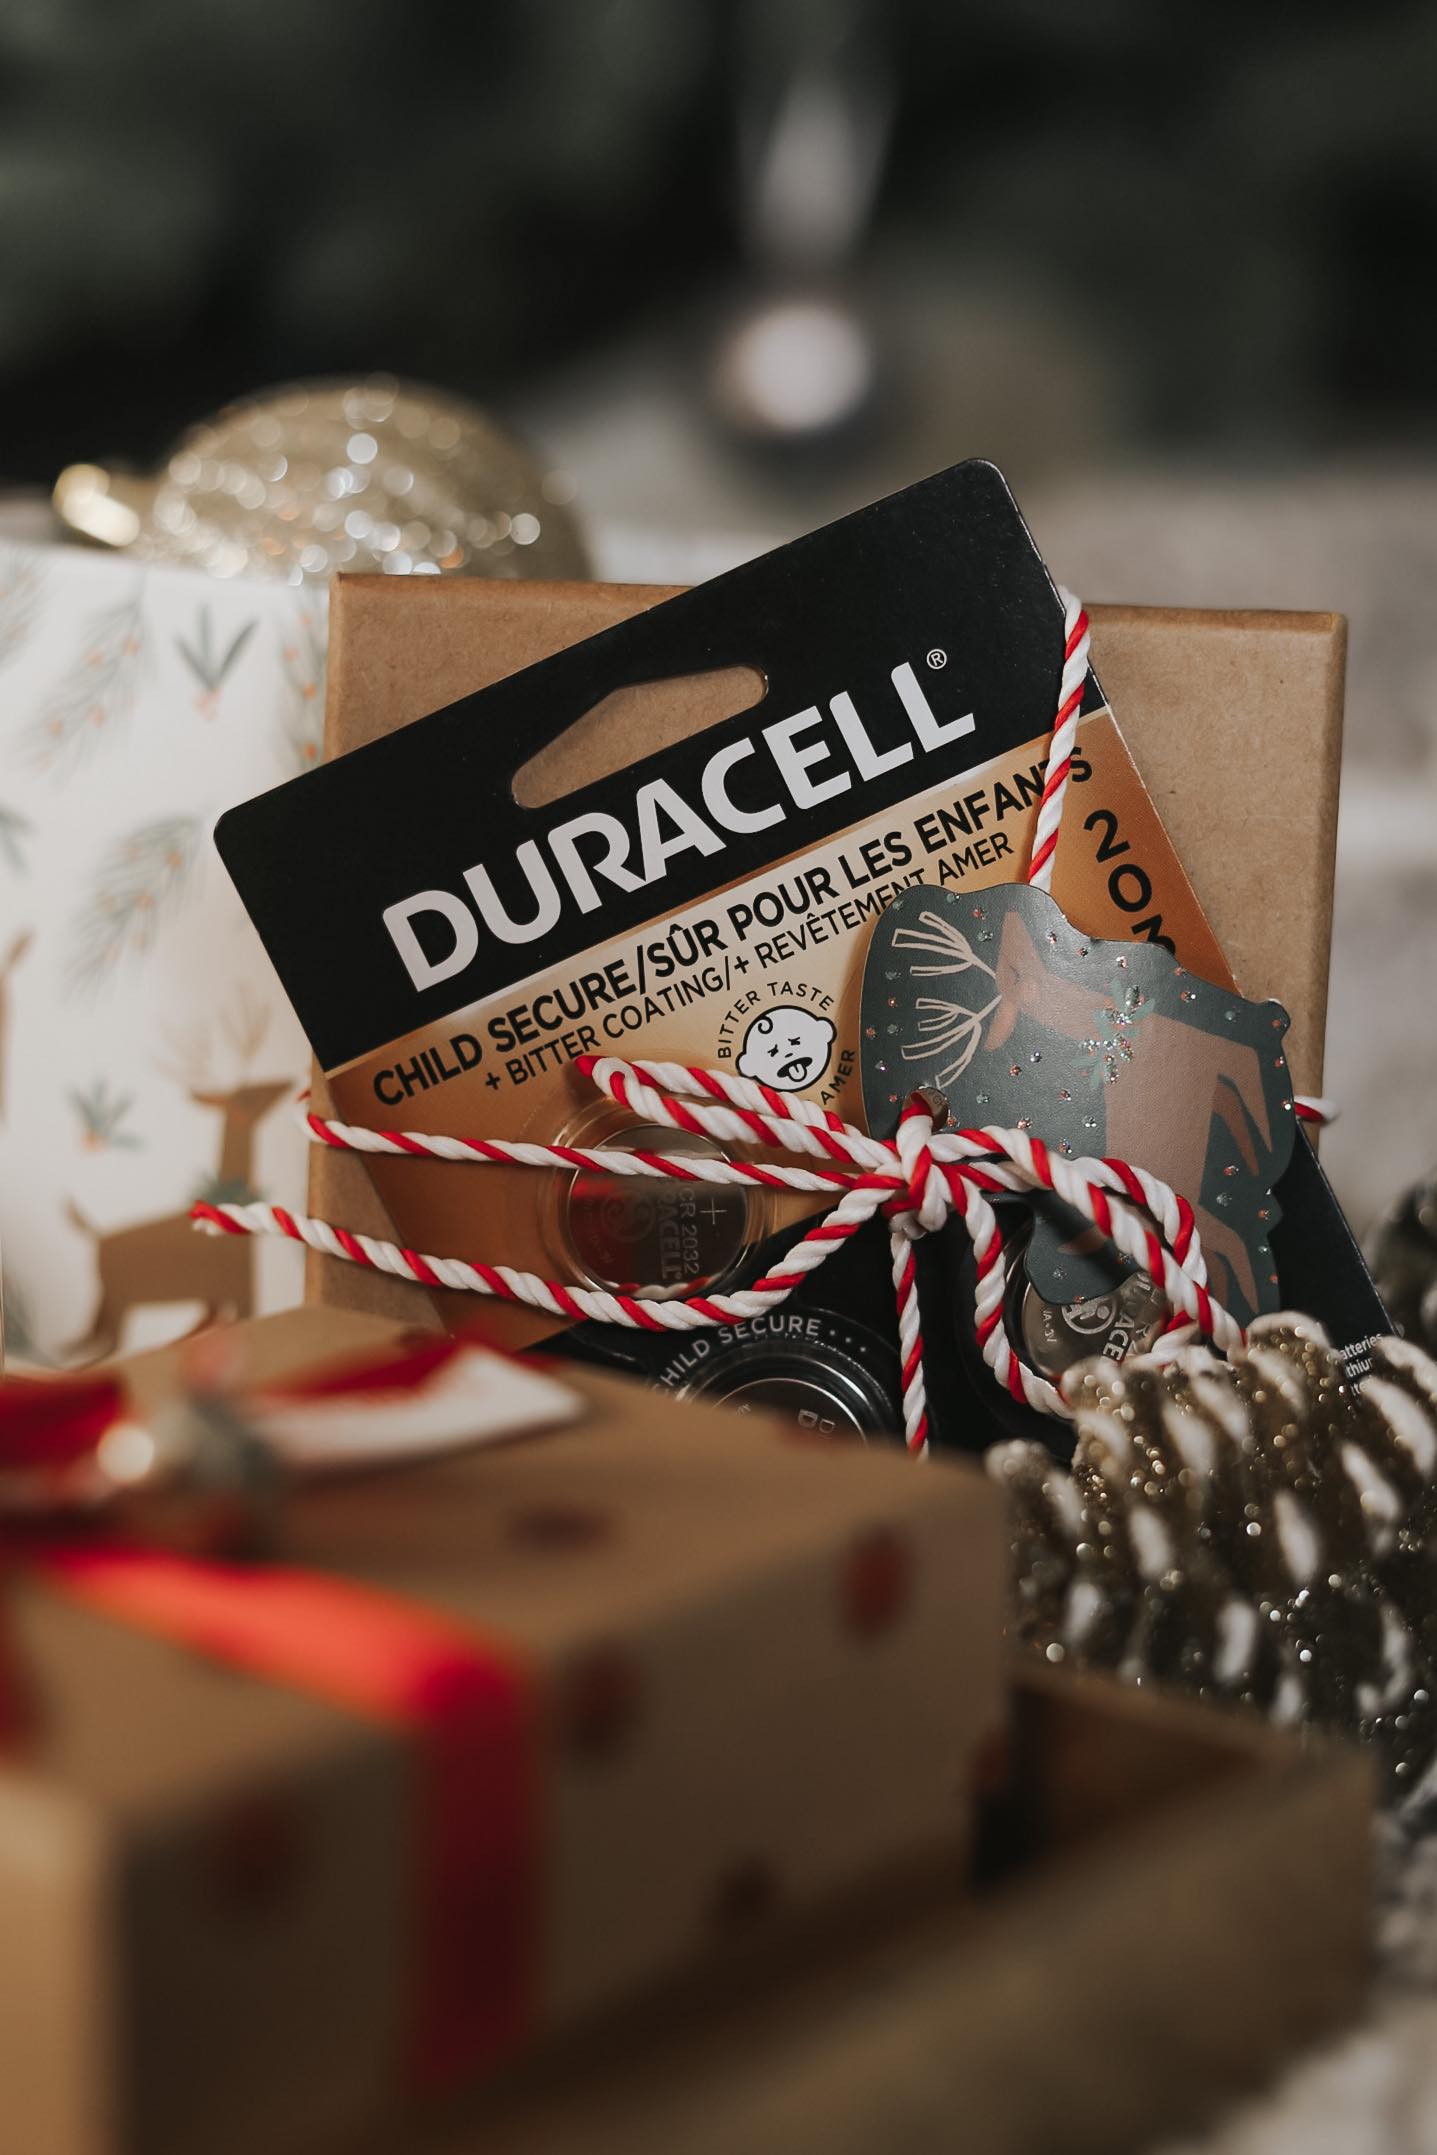 Keep Your Family a Little Safer with Duracell Lithium Coin Batteries with Bitter Coating